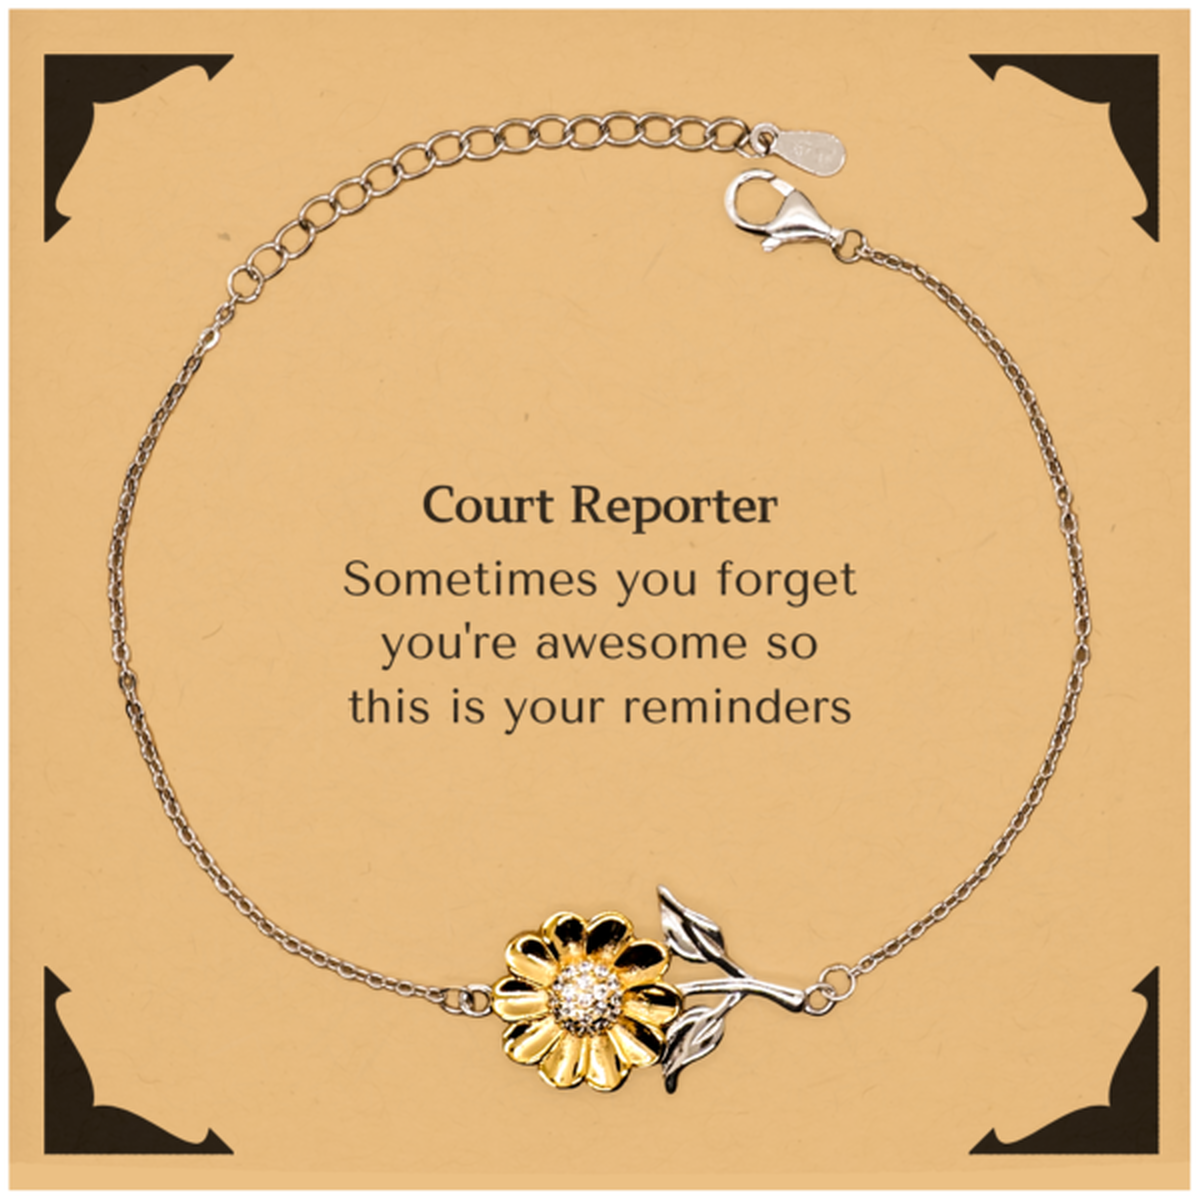 Sentimental Court Reporter Sunflower Bracelet, Court Reporter Sometimes you forget you're awesome so this is your reminders, Graduation Christmas Birthday Gifts for Court Reporter, Men, Women, Coworkers